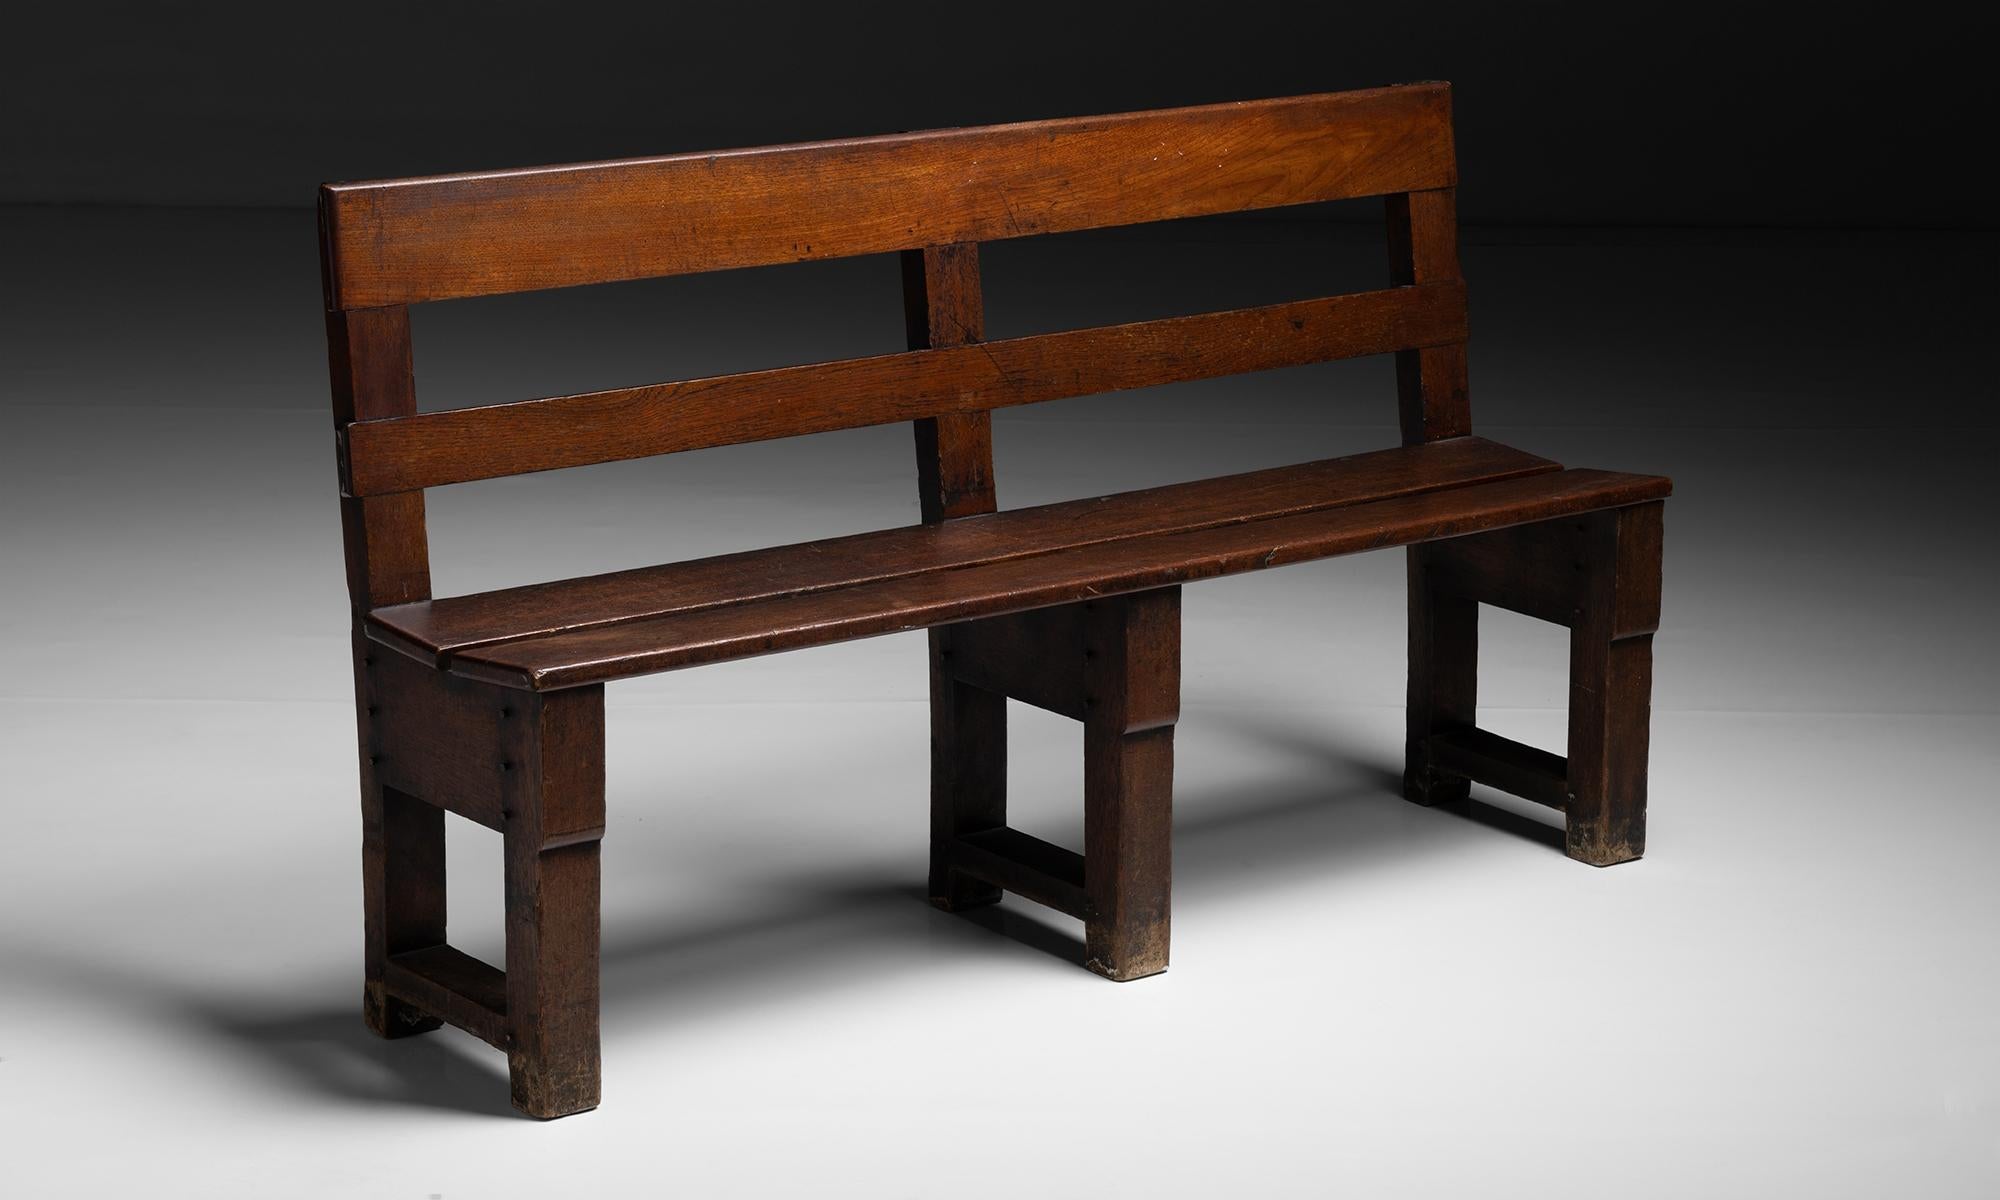 Edwardian Teak Bench

England circa 1900

Well made bench with dowelled construction pegs.

61.5”w x 16.5”d x 35”h x 18